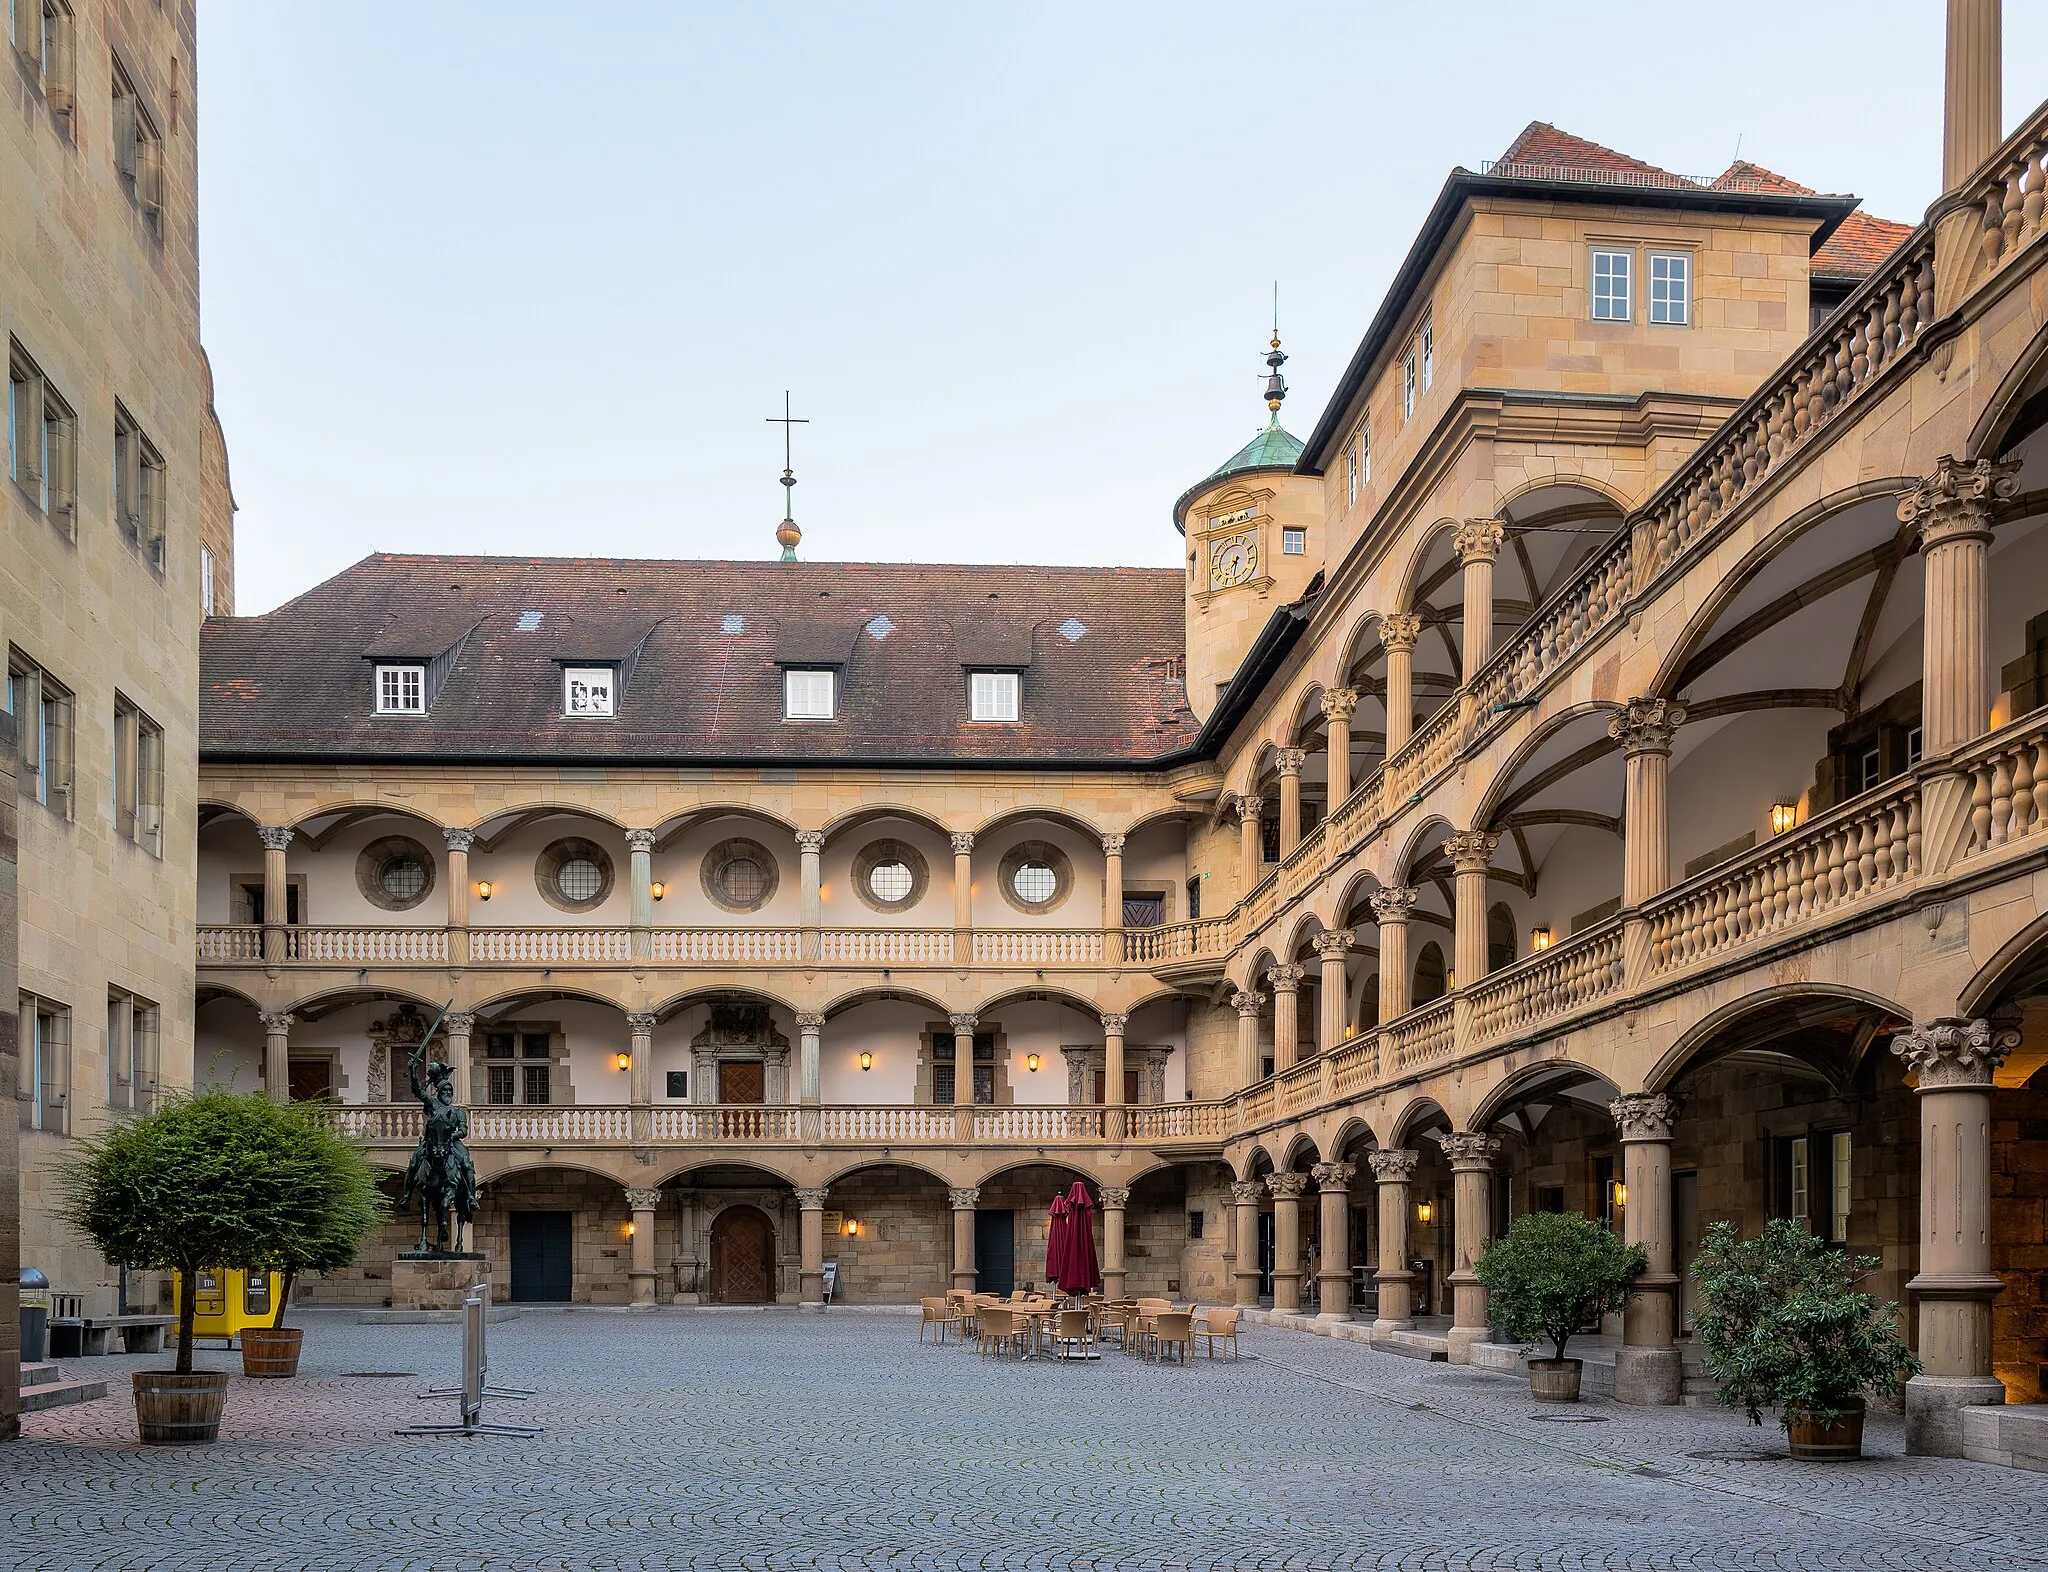 Photo showing: Inner courtyard of the Old Castle (Altes Schloss) in Stuttgart, Germany.